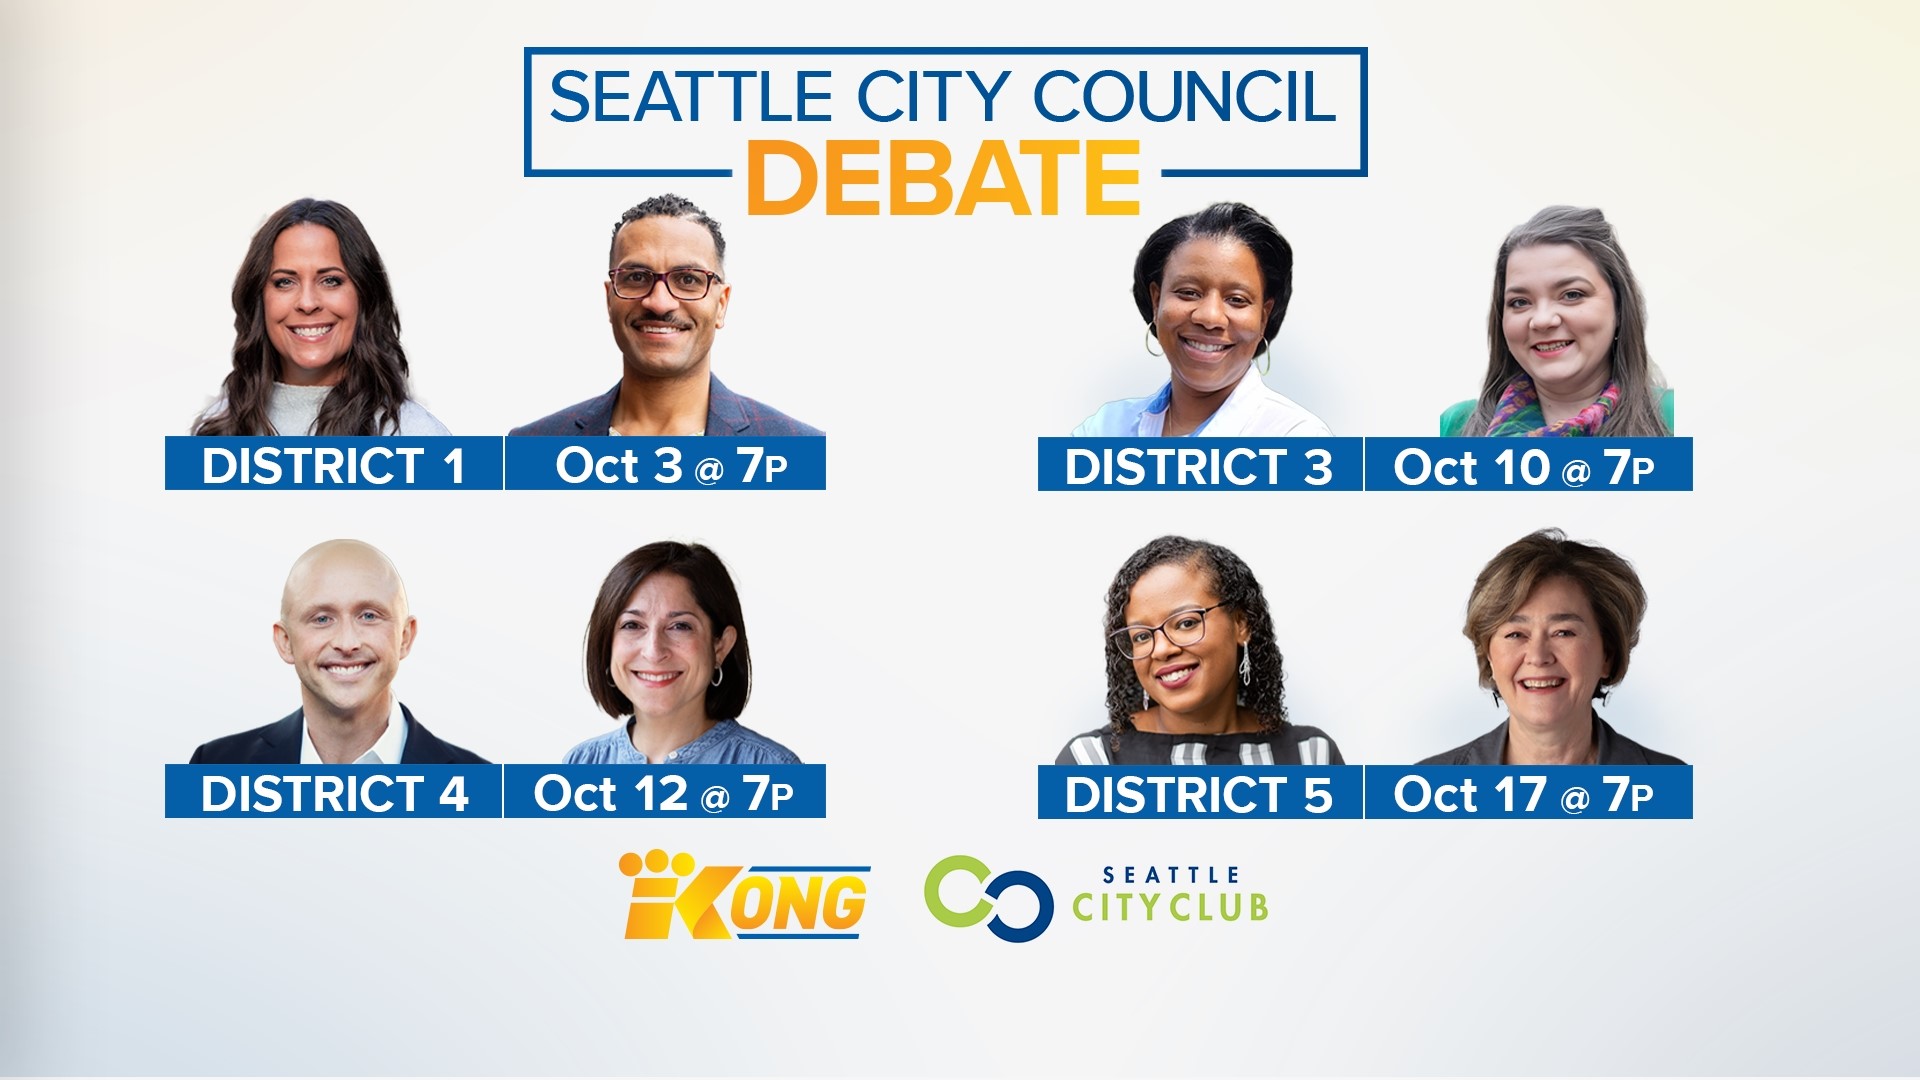 Seattle City Council election debate dates, times on KING 5